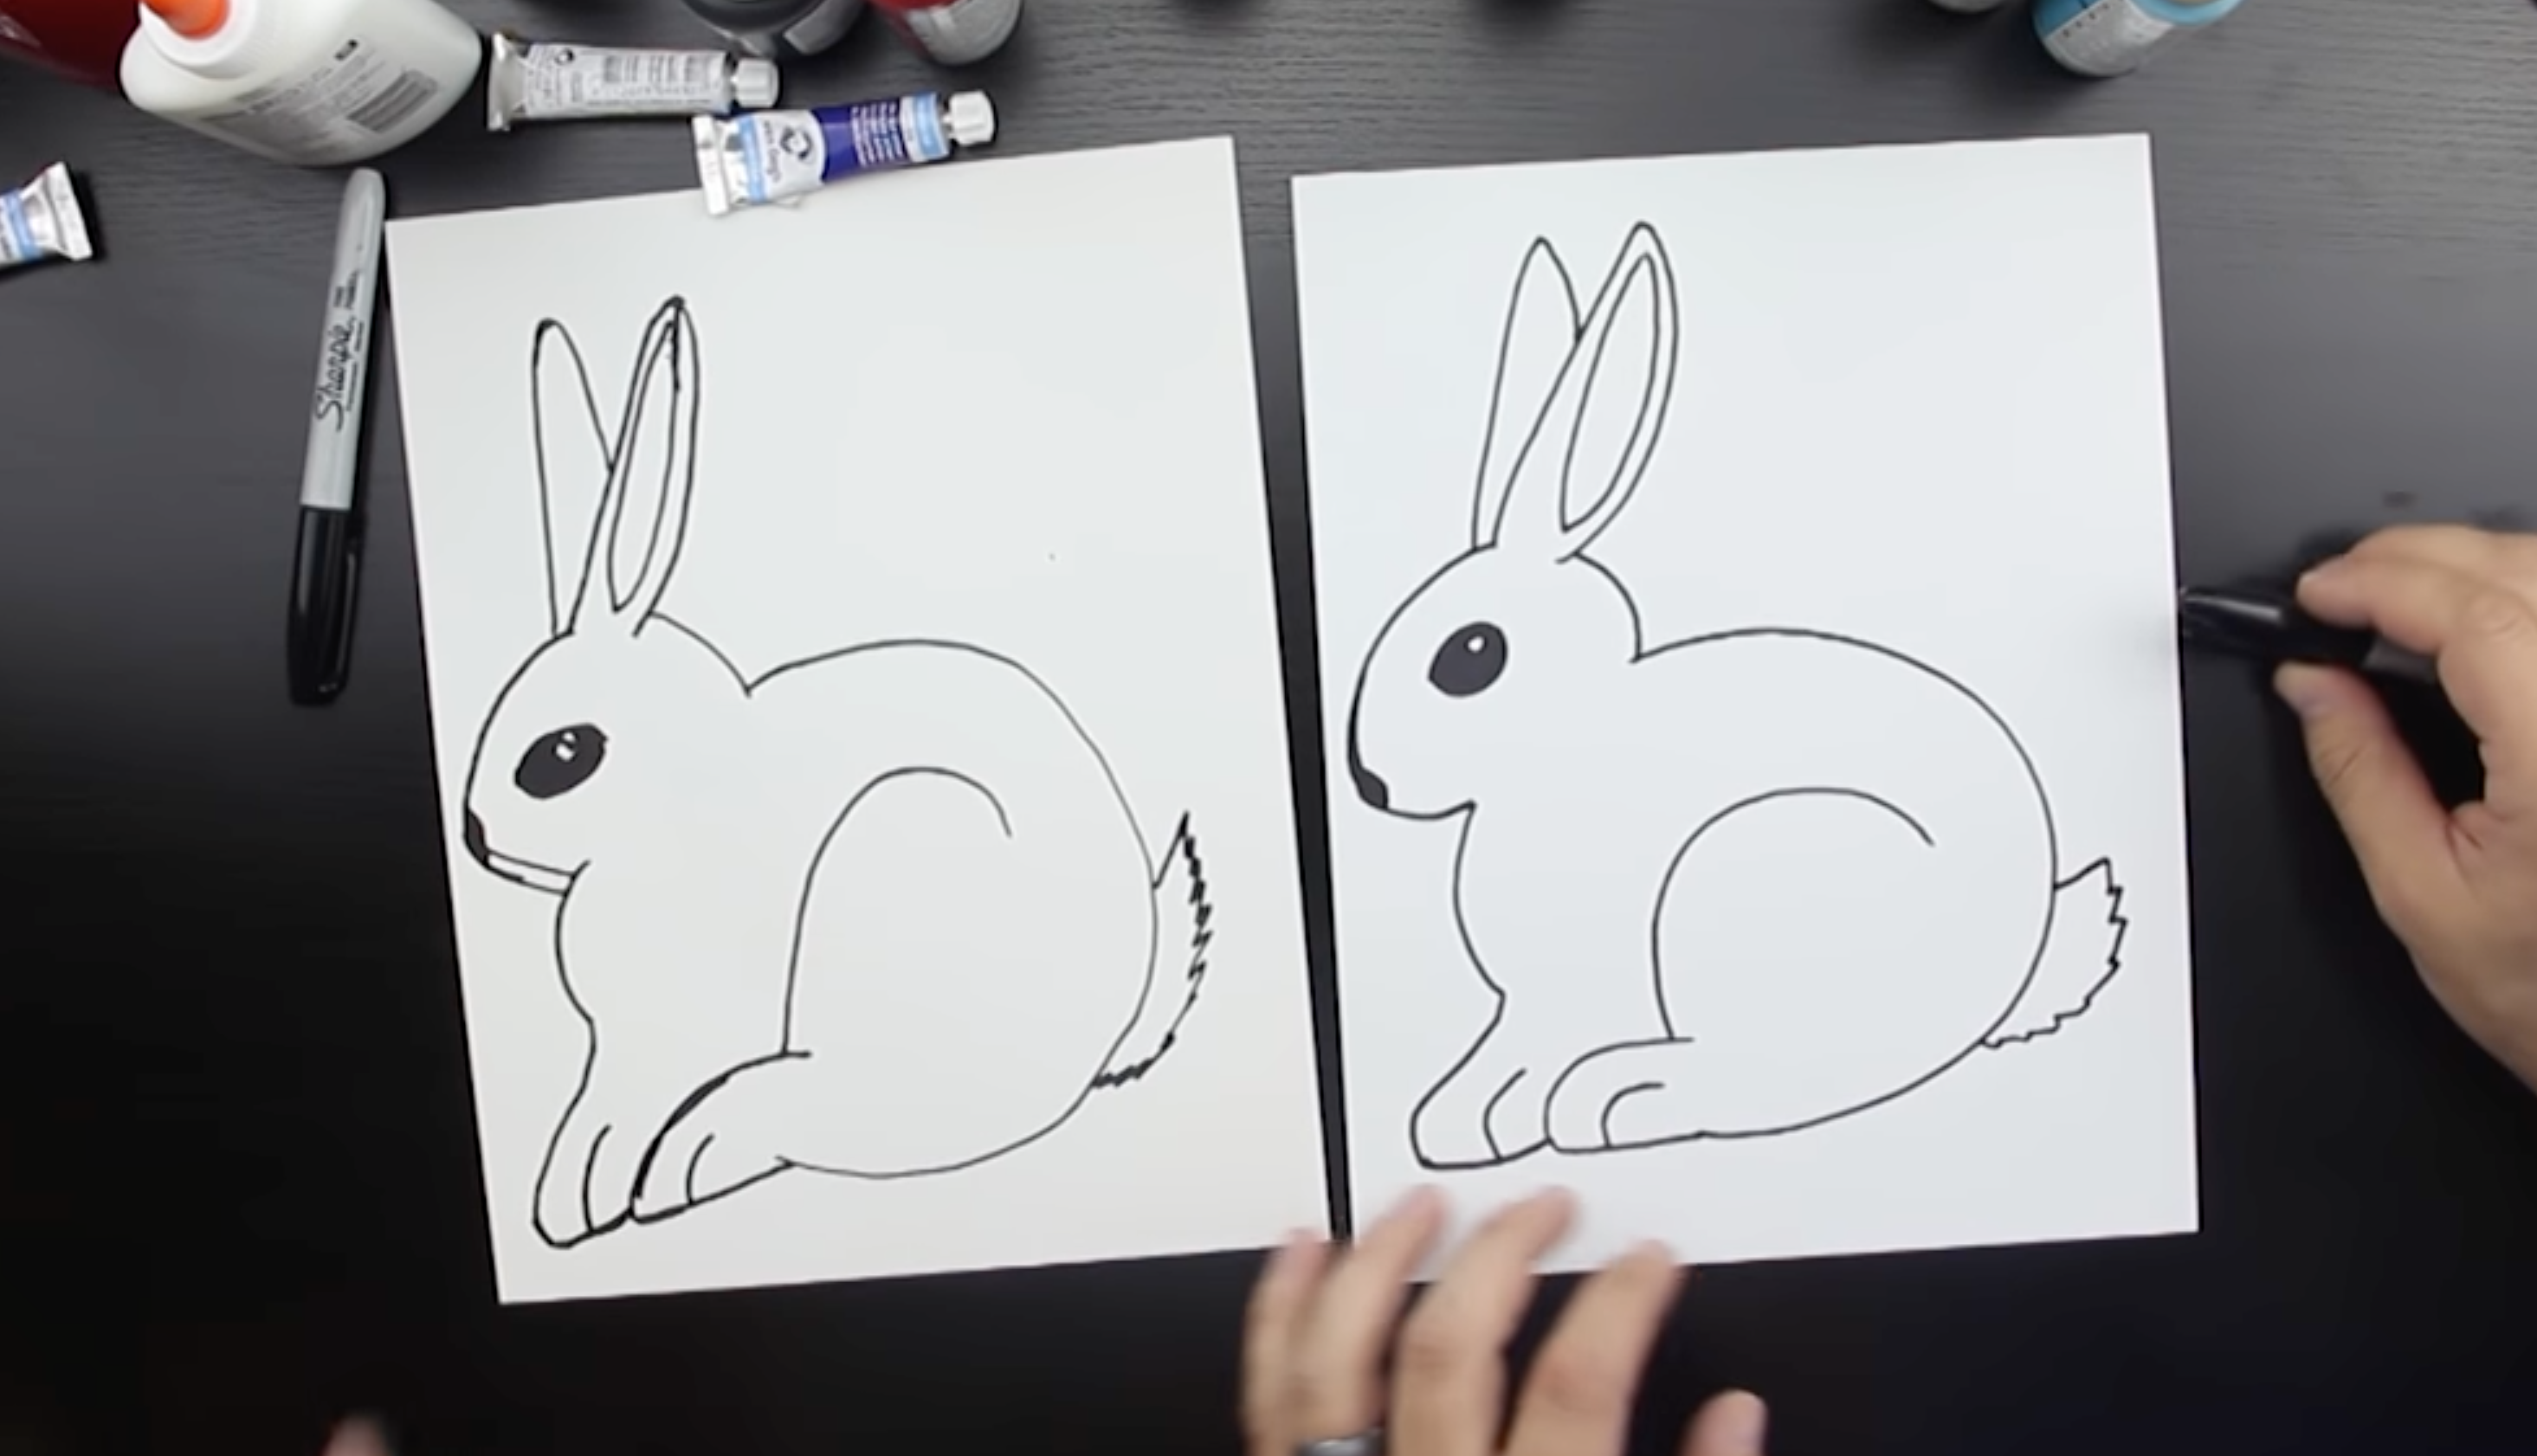 X 上的 Rabbit Videos：「how to draw cute rabbit drawing ... #3DDrawing  #BestDrawingsEver #CuteBunny #CuteDrawings #CuteRabbit #DrawSoCute  #DrawingAndColoring #DrawingAndPainting #EasyDrawing #HowToDraw  #PencilDrawing #PencilSketchDrawing #SimpleDrawing ...